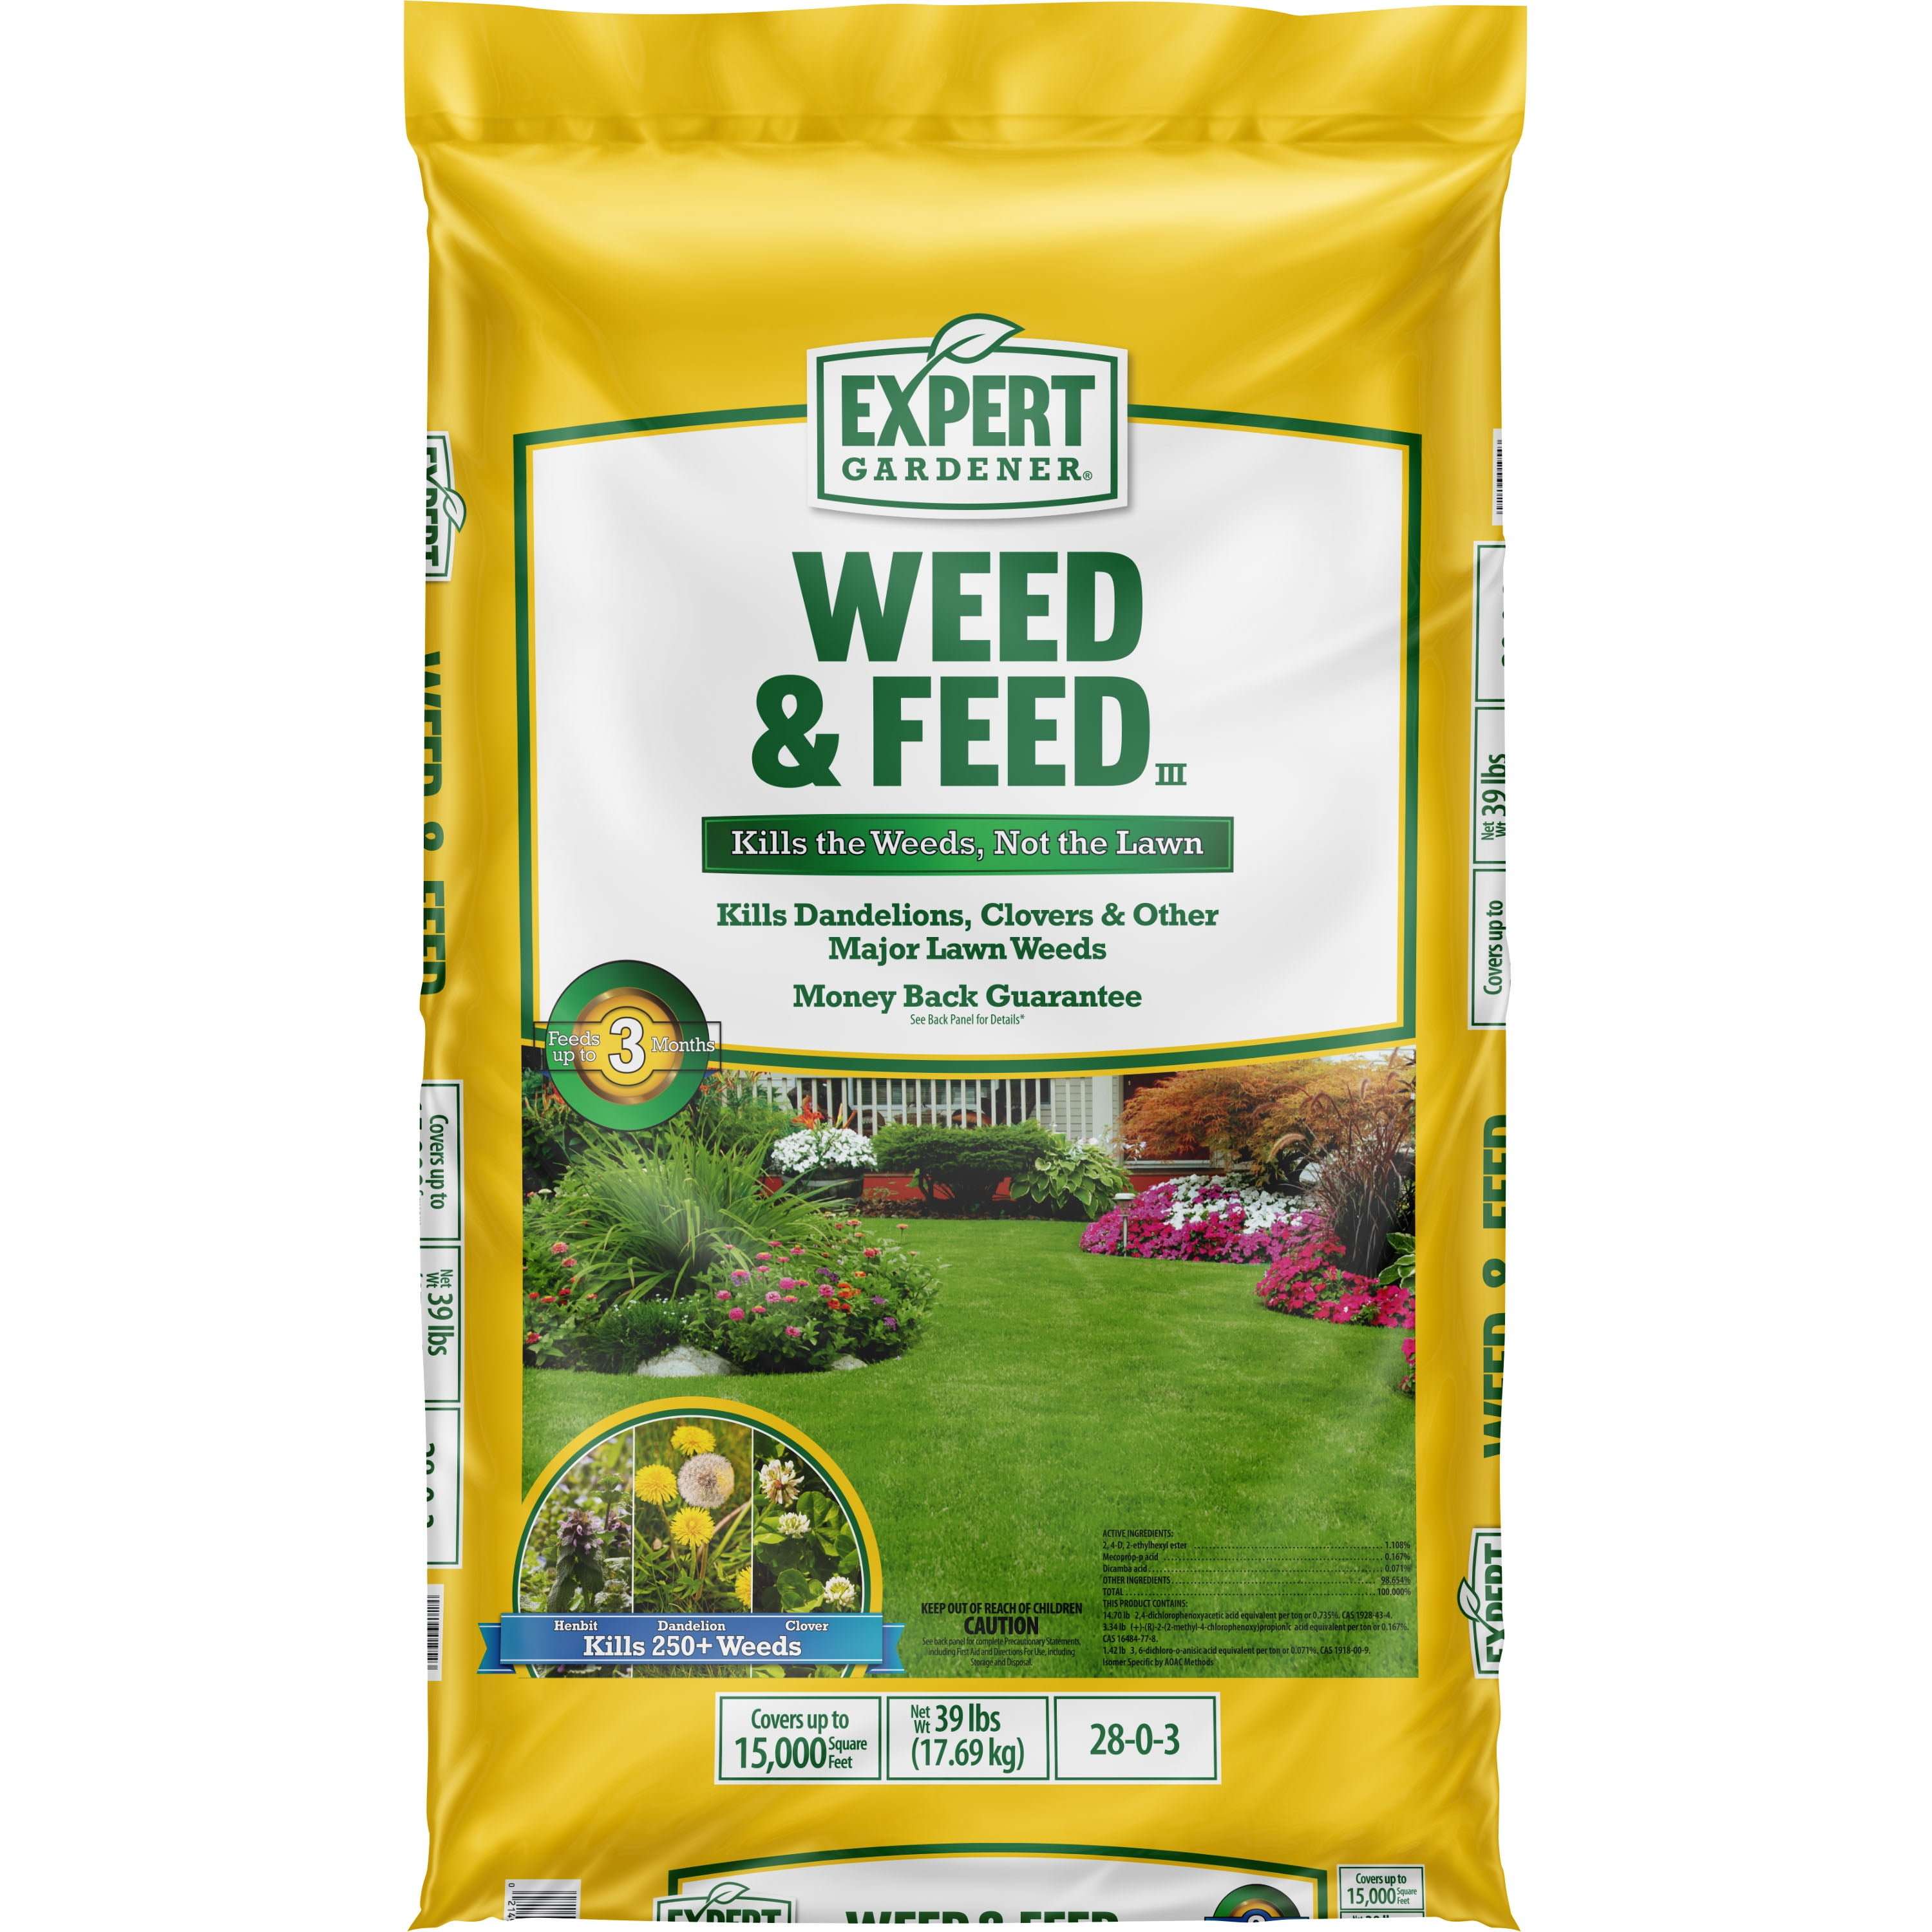 Expert Gardener Weed & Feed Lawn Food Fertilizer & Weed Control, 39.2 lb., Covers 15,000 Sq. ft.